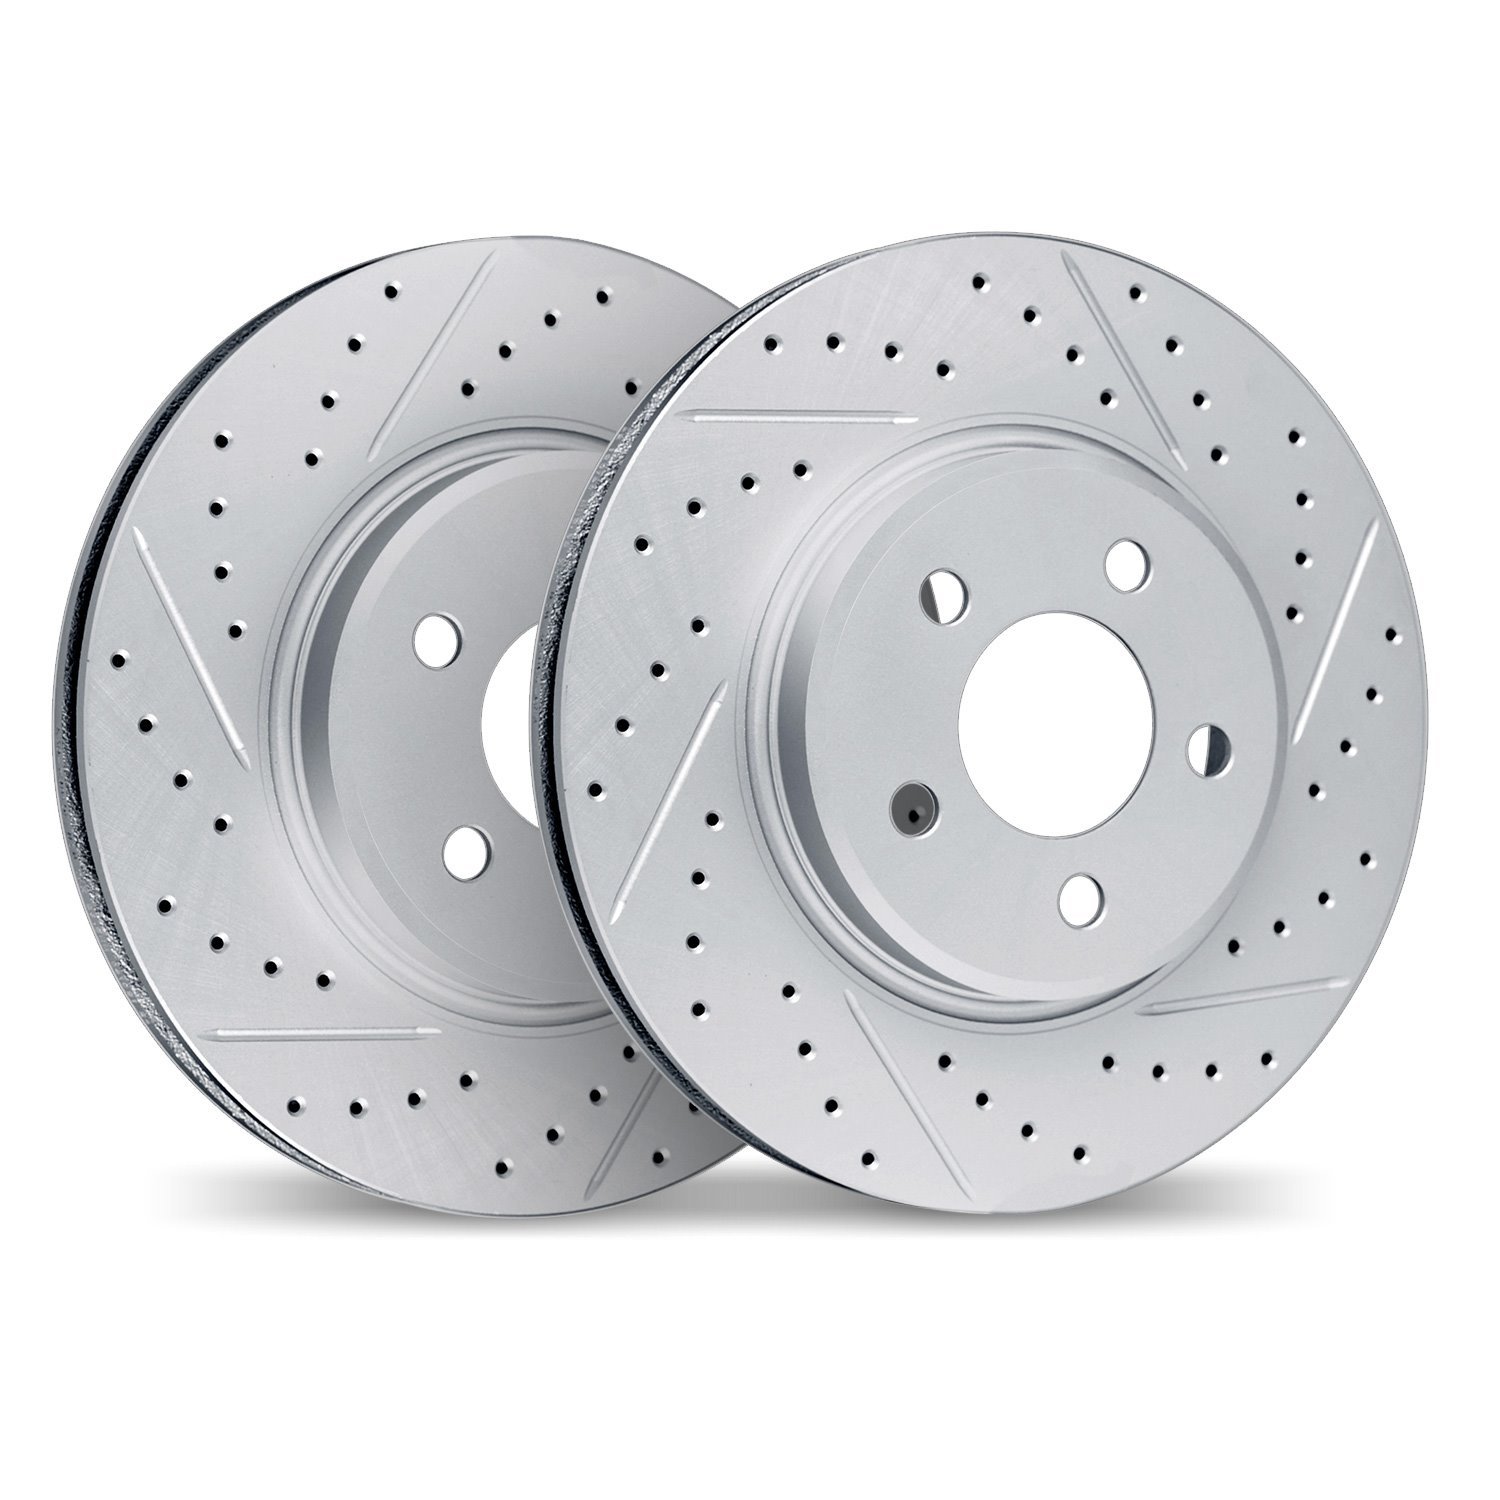 2002-67017 Geoperformance Drilled/Slotted Brake Rotors, 1989-1996 Infiniti/Nissan, Position: Front